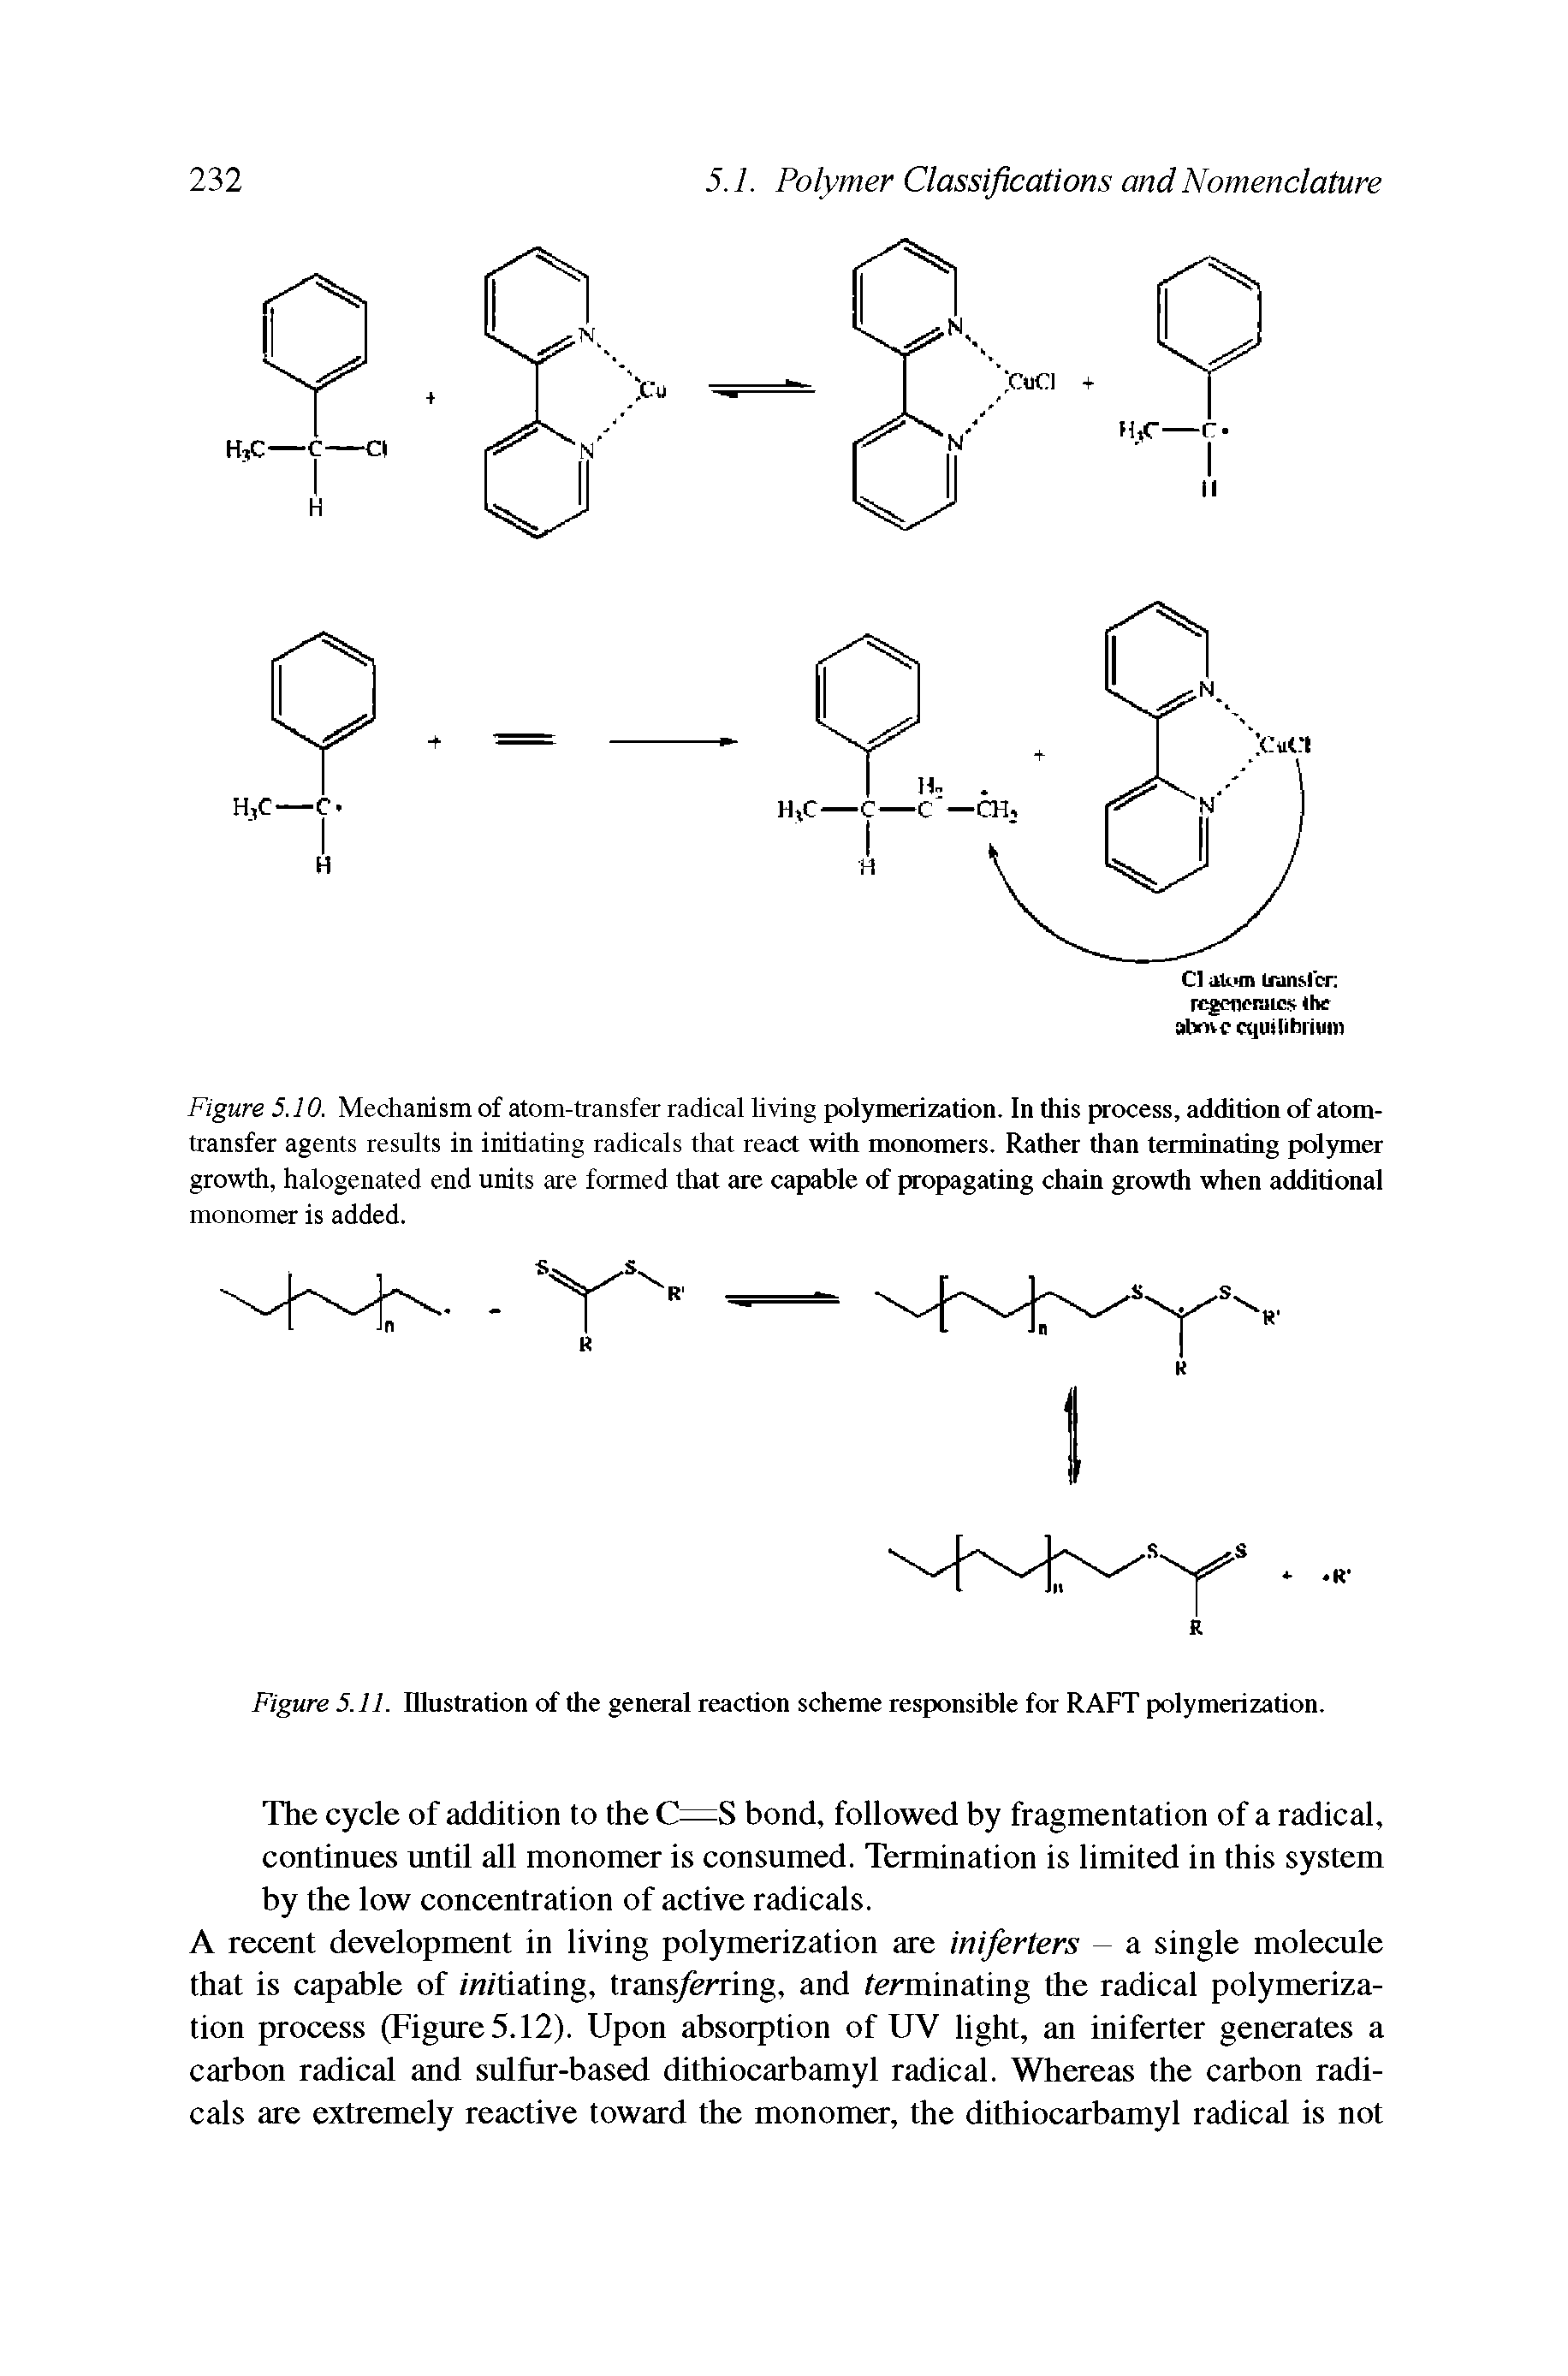 Figure 5.10. Mechanism of atom-transfer radical living polymerization. In this process, addition of atom-transfer agents results in initiating radicals that react with monomers. Rather than terminating polymer growth, halogenated end units are formed that are capable of propagating chain growth when additional monomer is added.